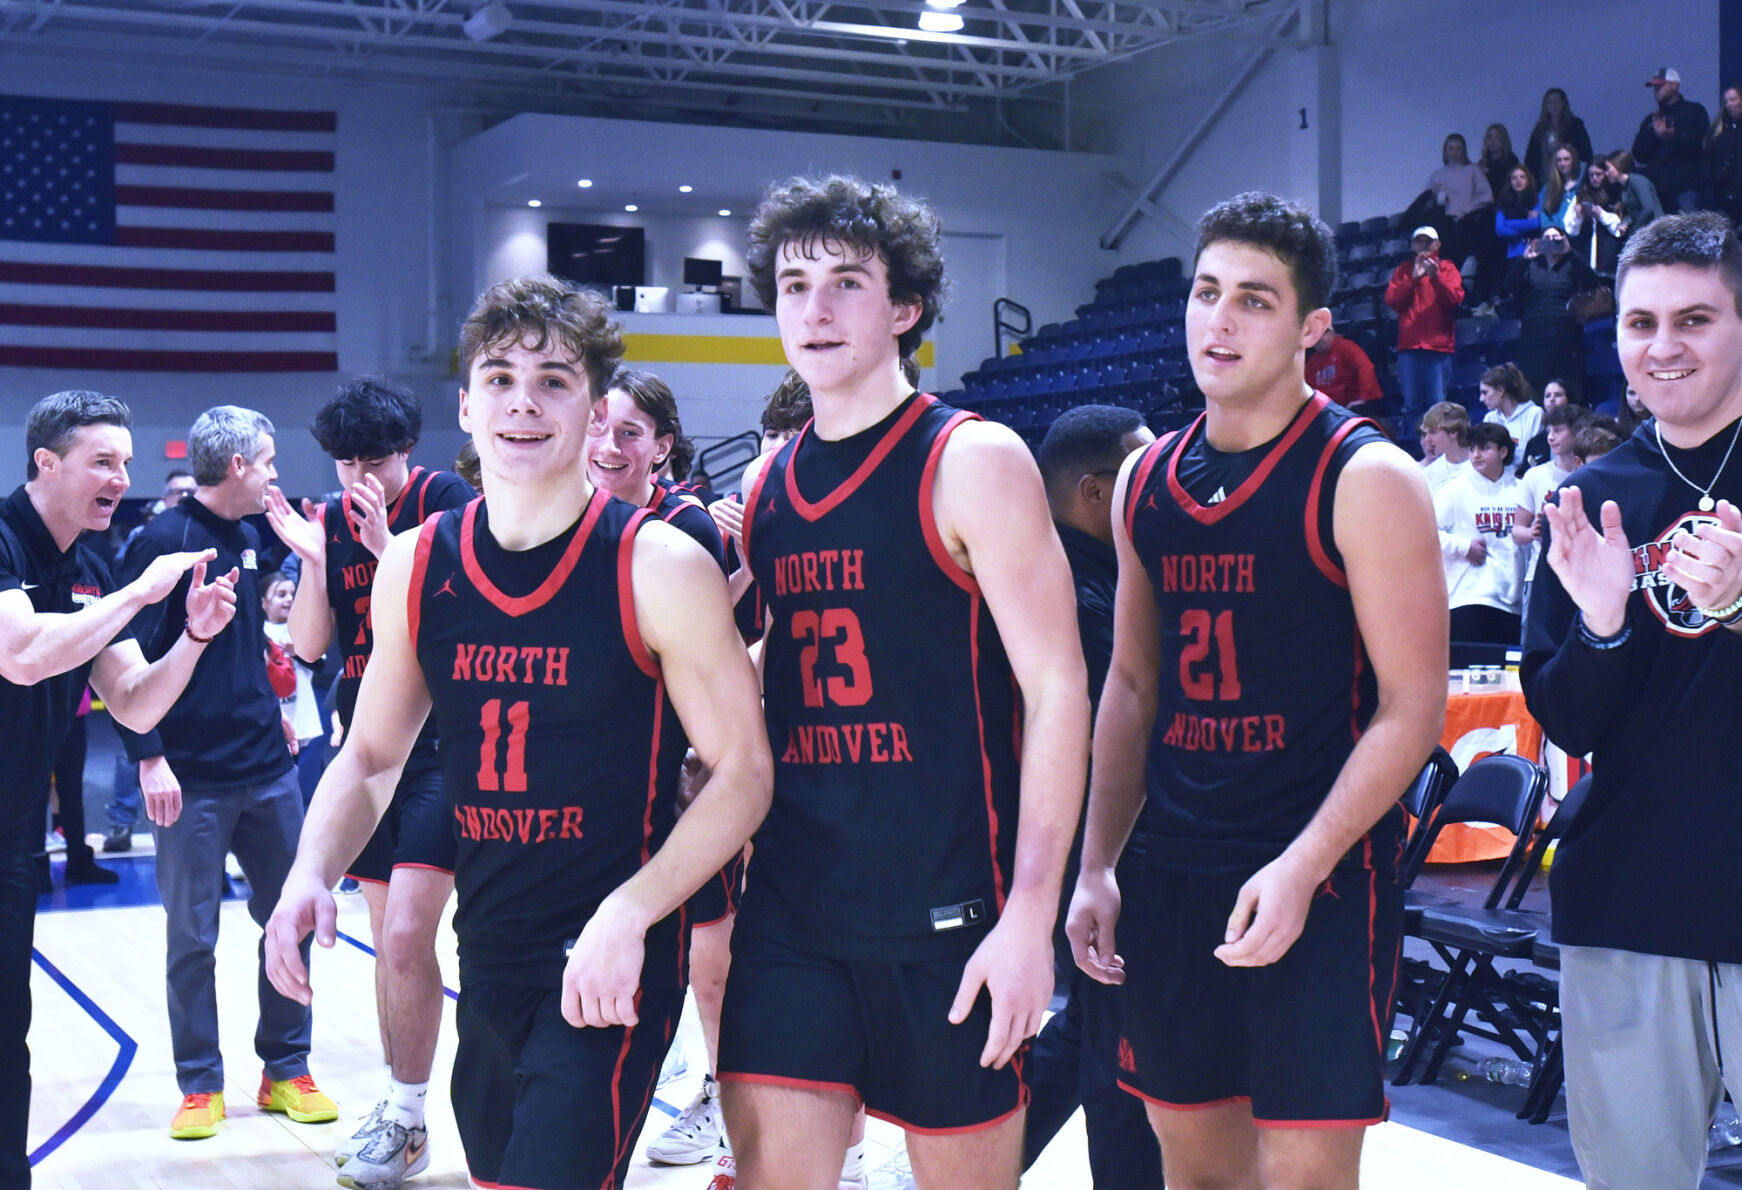 Top Boys Hoop Teams in the Area: North Andover and Pinkerton Academy Lead with Impressive Records